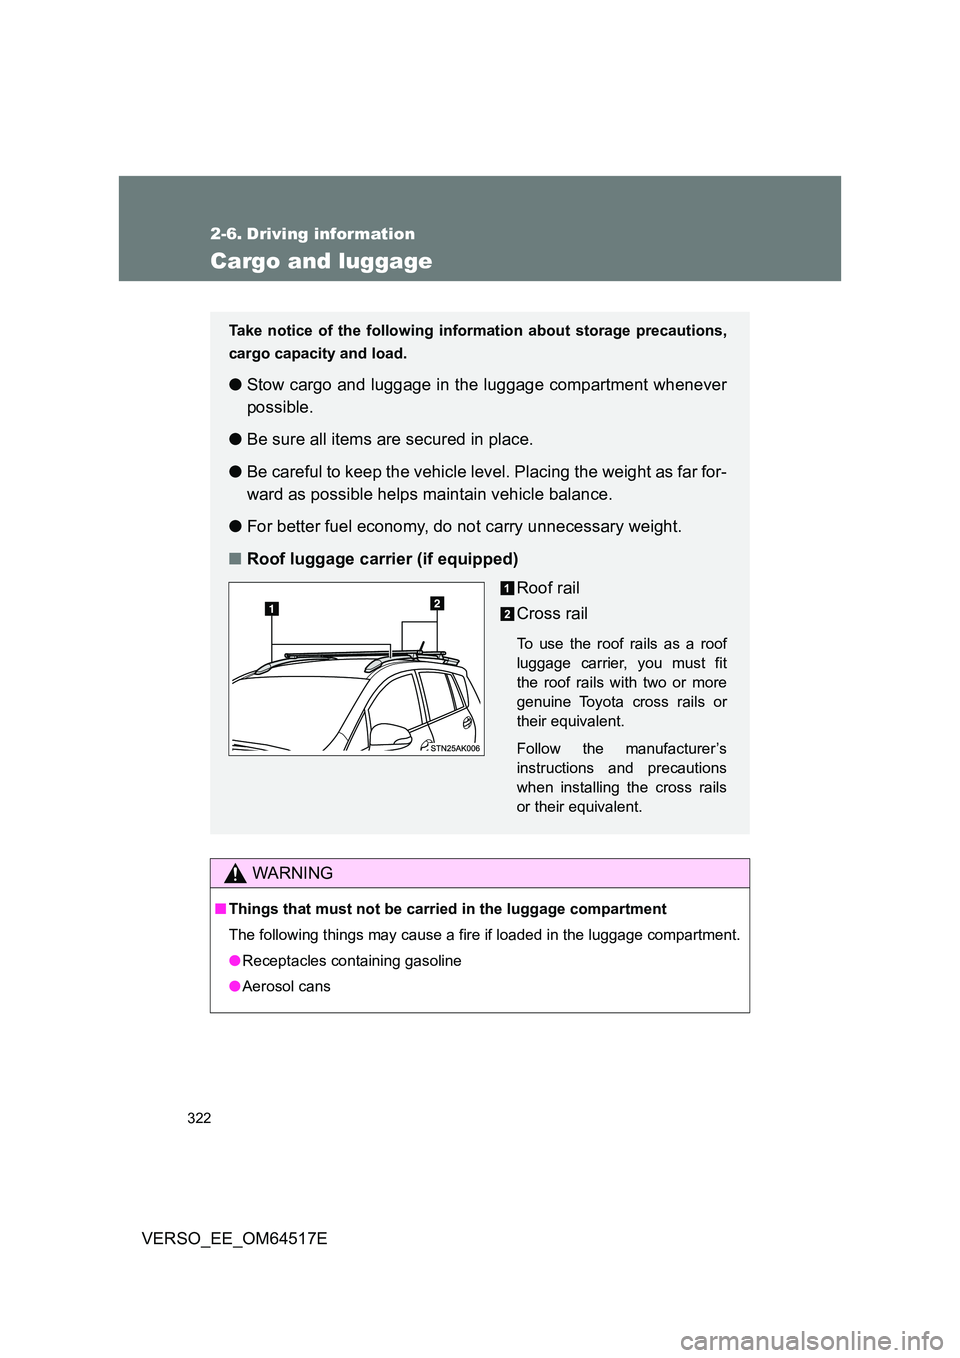 TOYOTA VERSO 2017  Owners Manual 322
VERSO_EE_OM64517E
2-6. Driving information
Cargo and luggage
WARNING
■Things that must not be carried in the luggage compartment 
The following things may cause a fi re if loaded in the luggage 